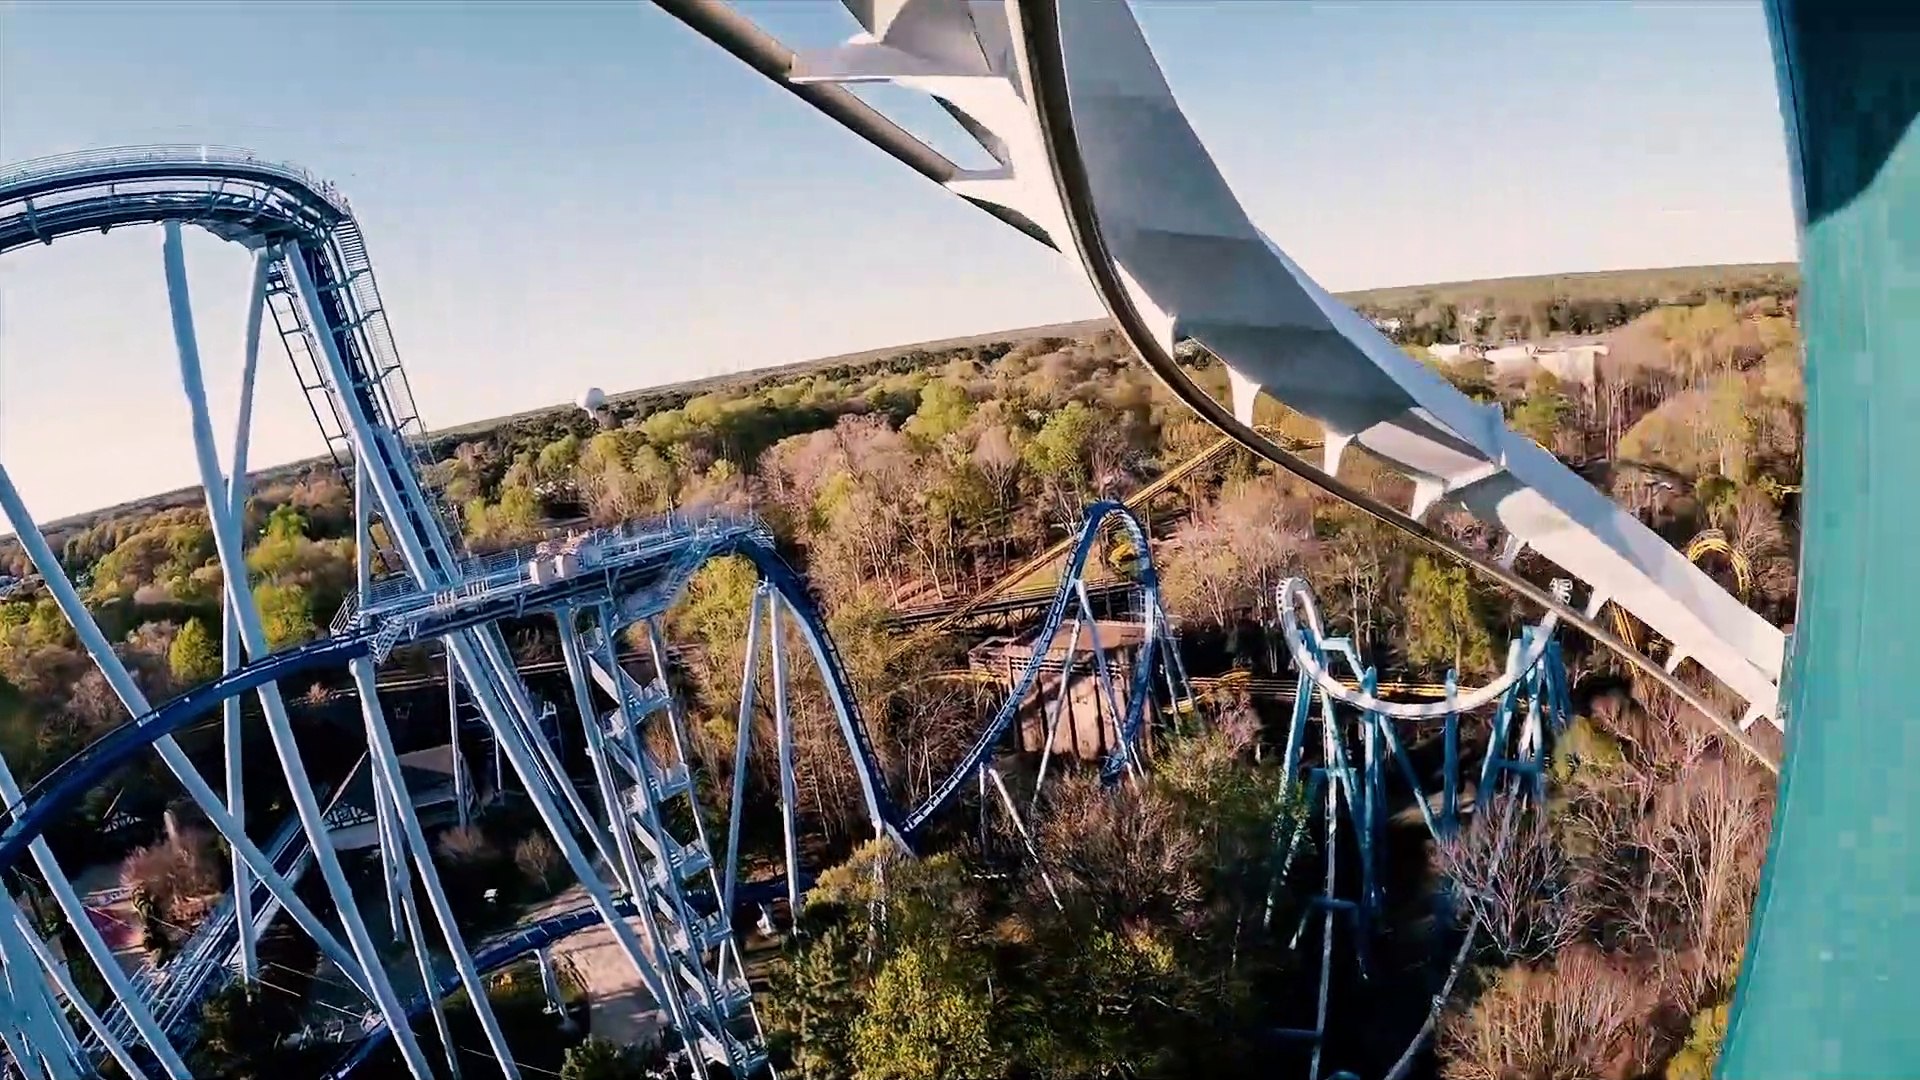 SheiKra Front Row POV Ride at Busch Gardens Tampa Bay on Roller